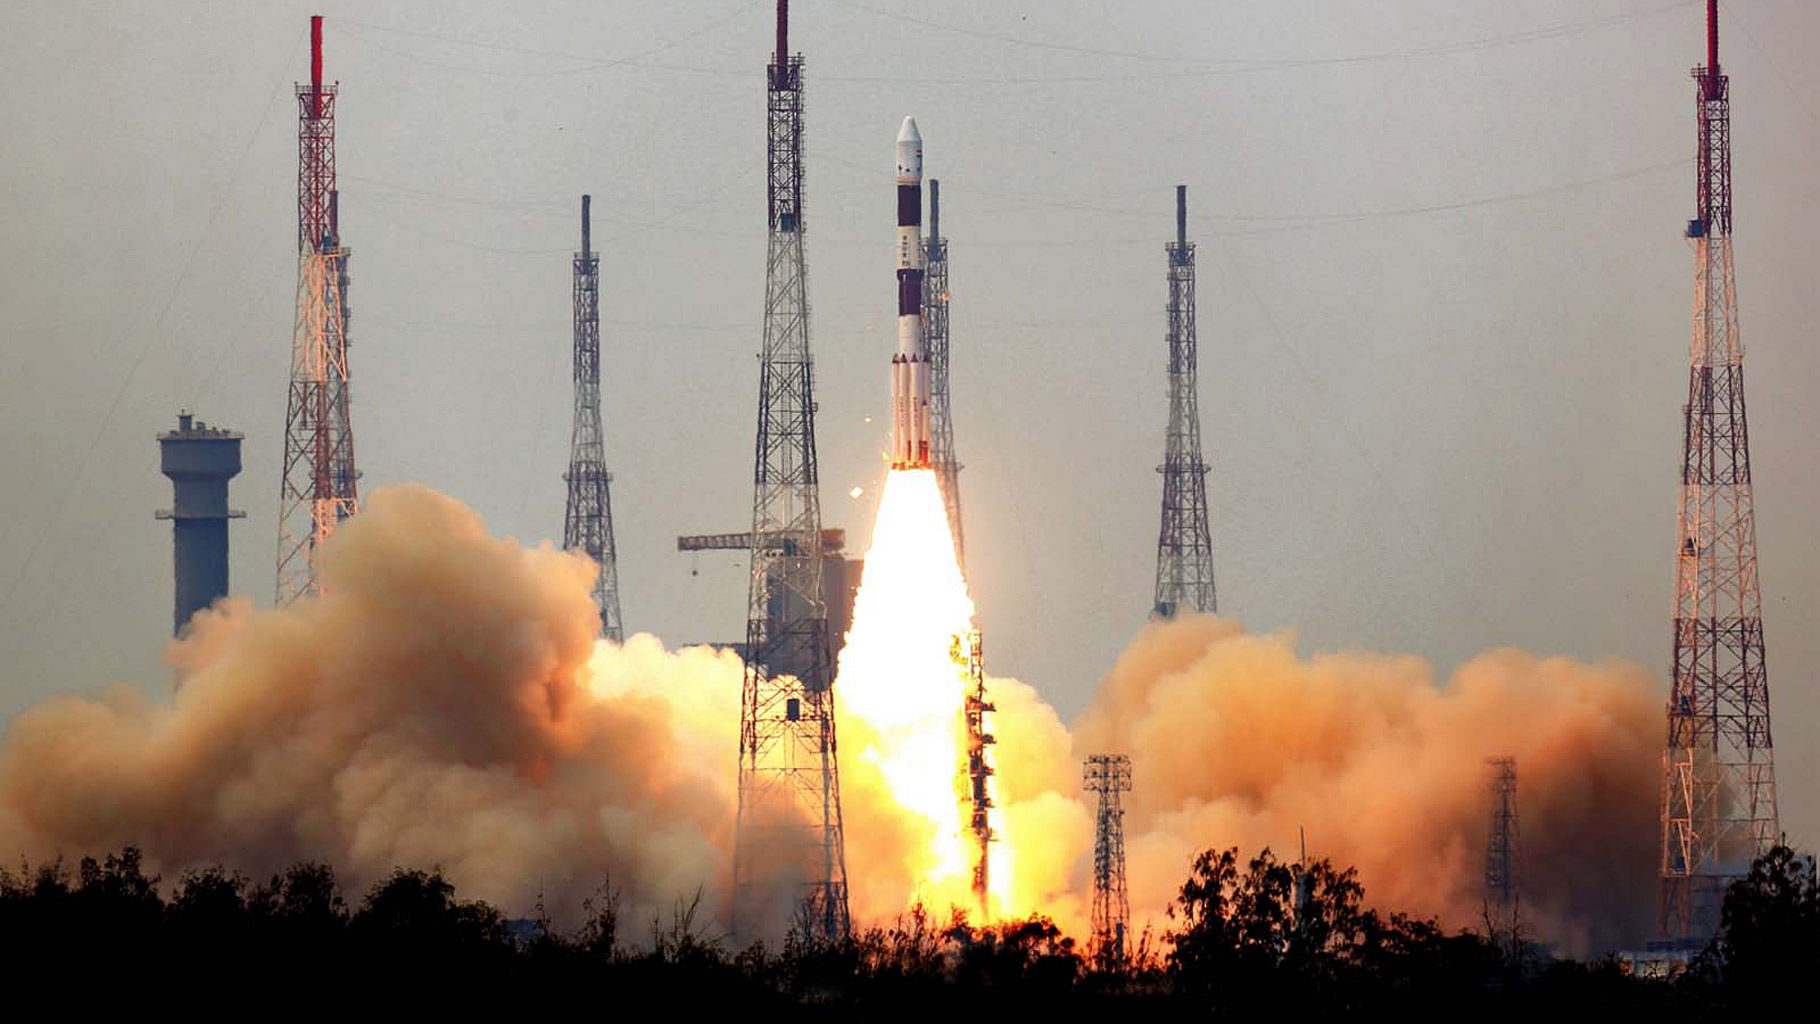 At 3.2 tonnes, the GSLV Mk-III will be the heaviest satellite to be lifted by an Indian rocket (Photo: ISRO)